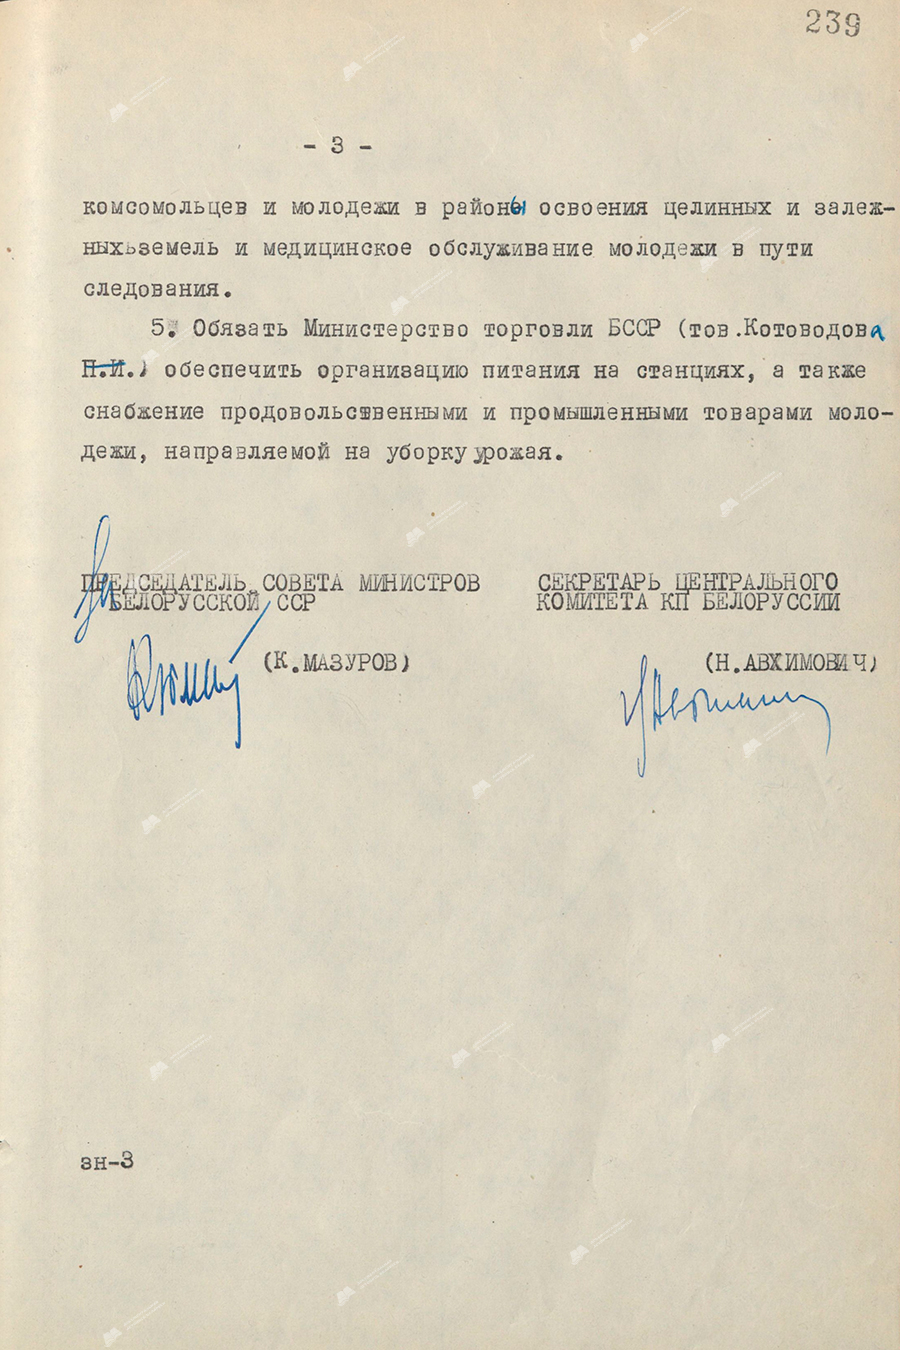 Resolution No. 351 of the Council of Ministers of the BSSR and the Central Committee of the Communist Party of Belarus «On the participation of Komsomol members and youth of the republic and harvesting in areas of development of virgin and fallow lands»-стр. 2